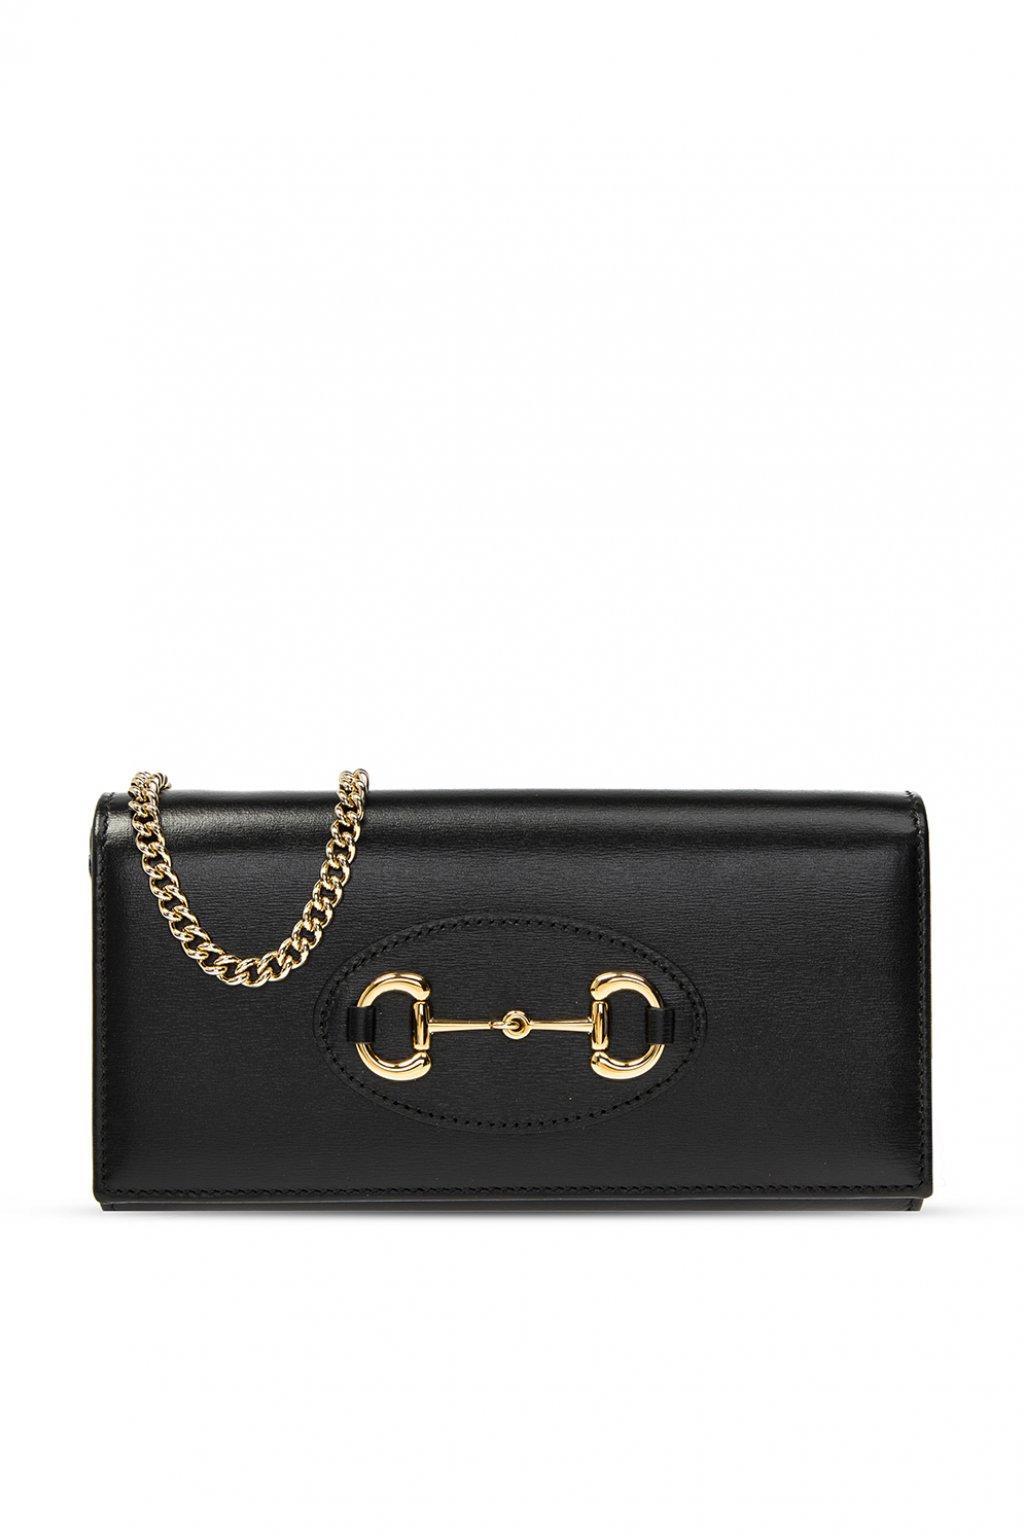 Gucci Long Wallet with Horsebit, Black, Leather